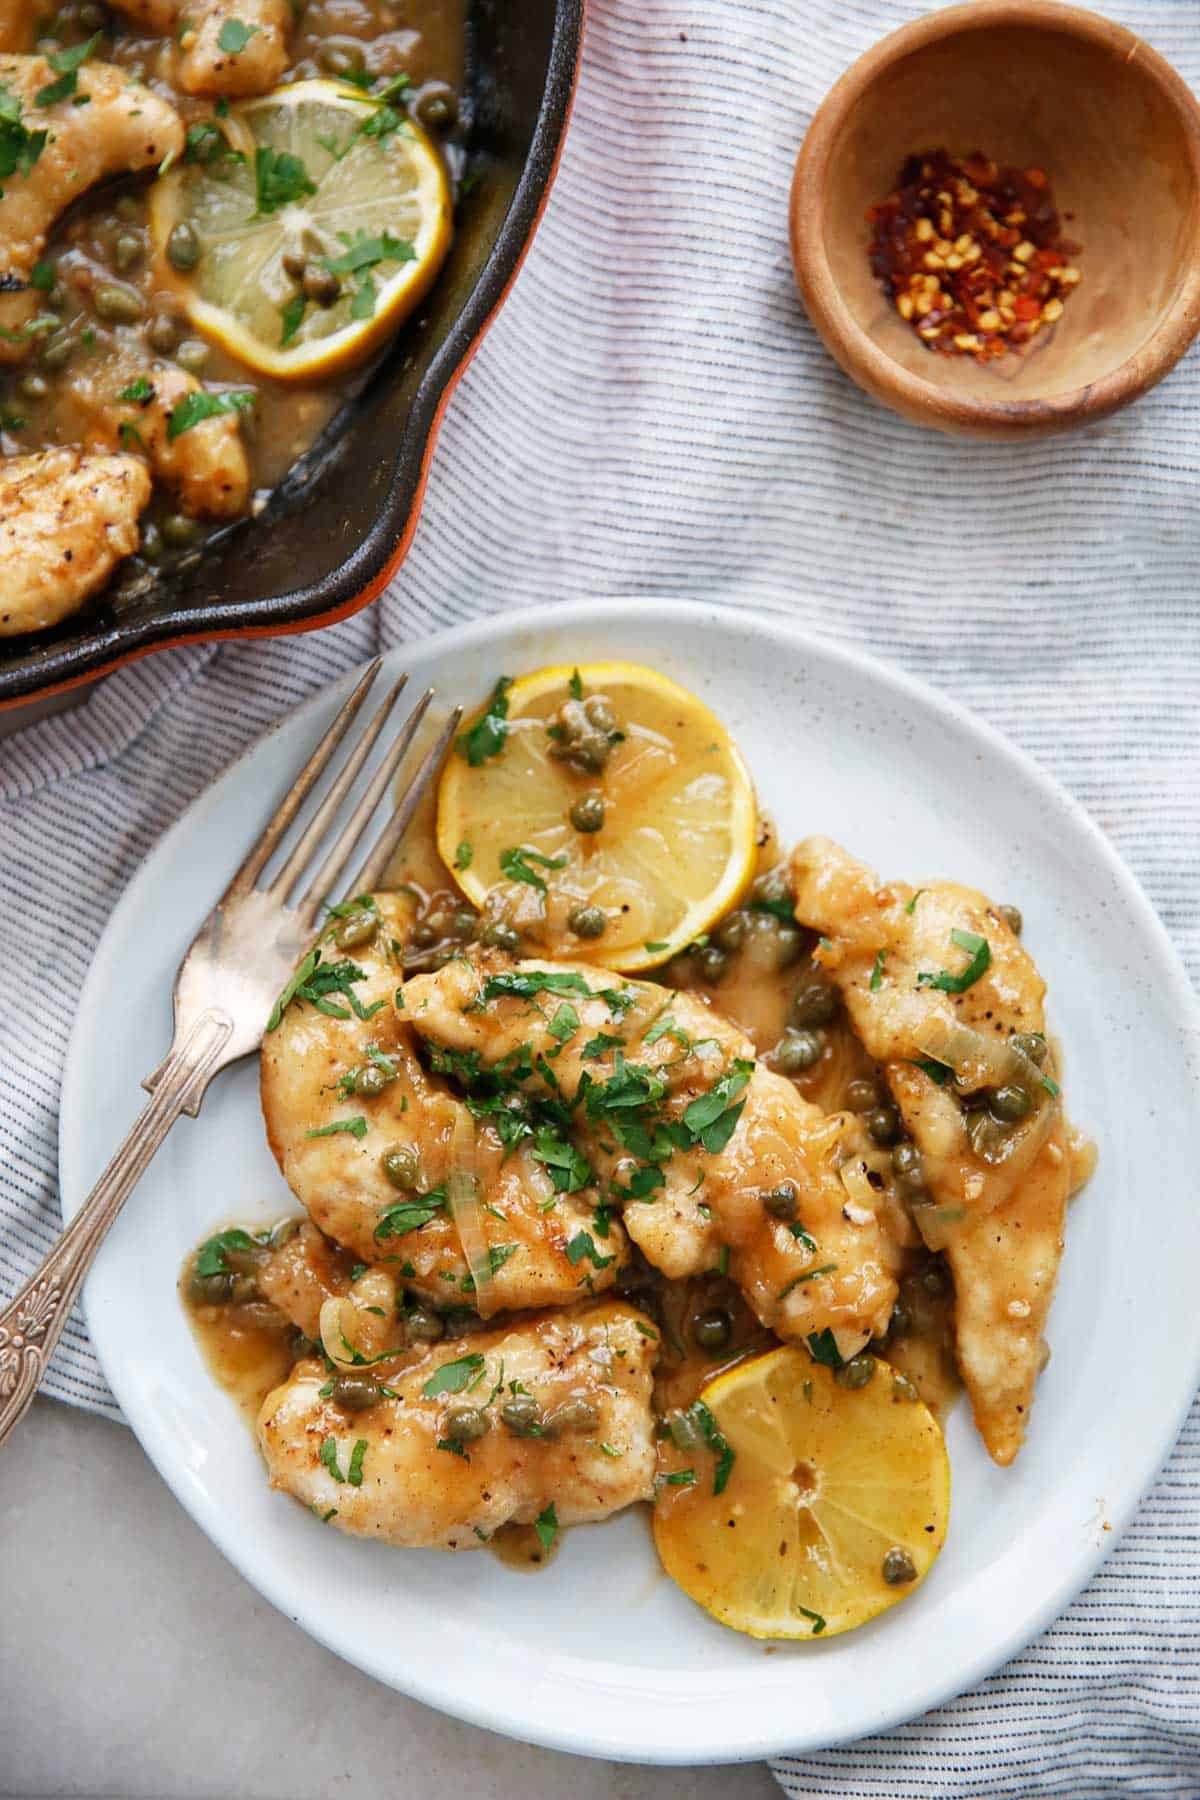 Gluten free chicken piccata with lemon and capers on a plate